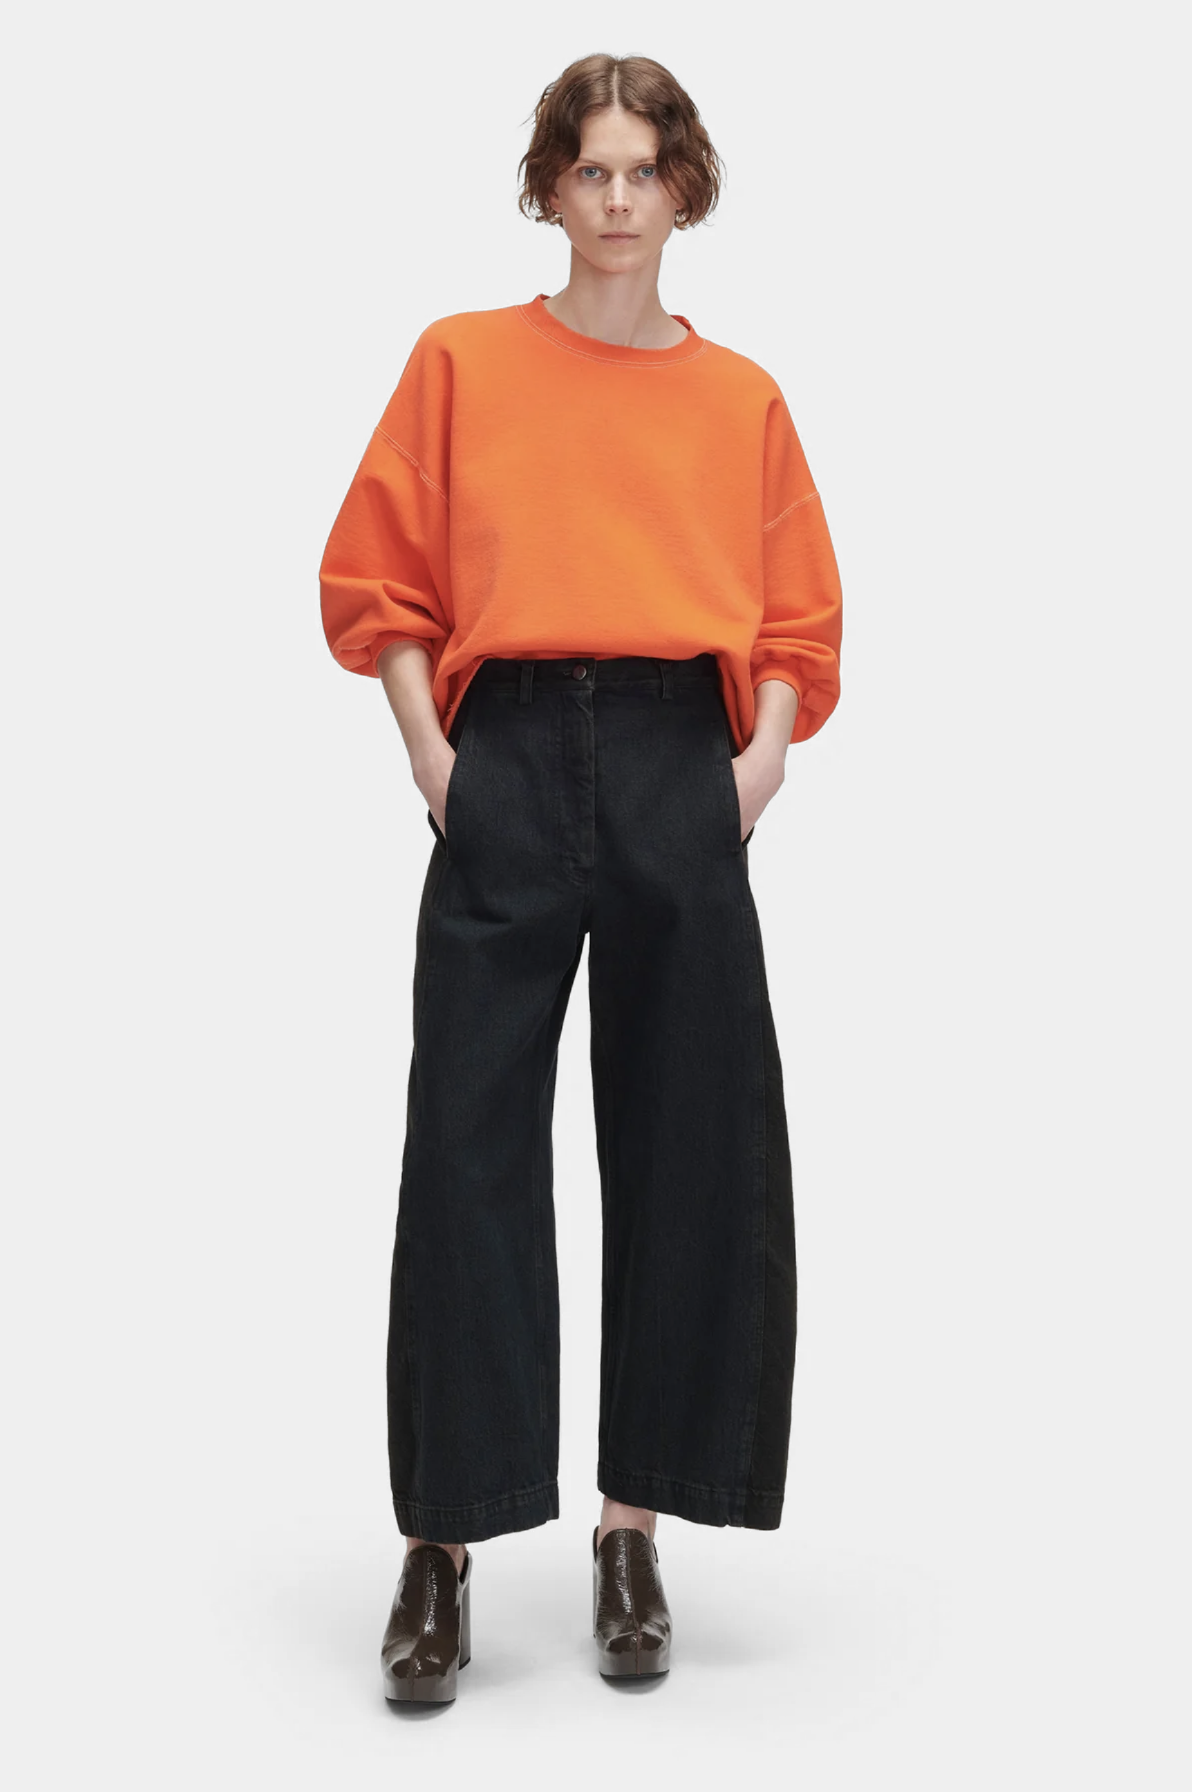 Garra Pant in Brown Overdyed Mission Denim by Rachel Comey